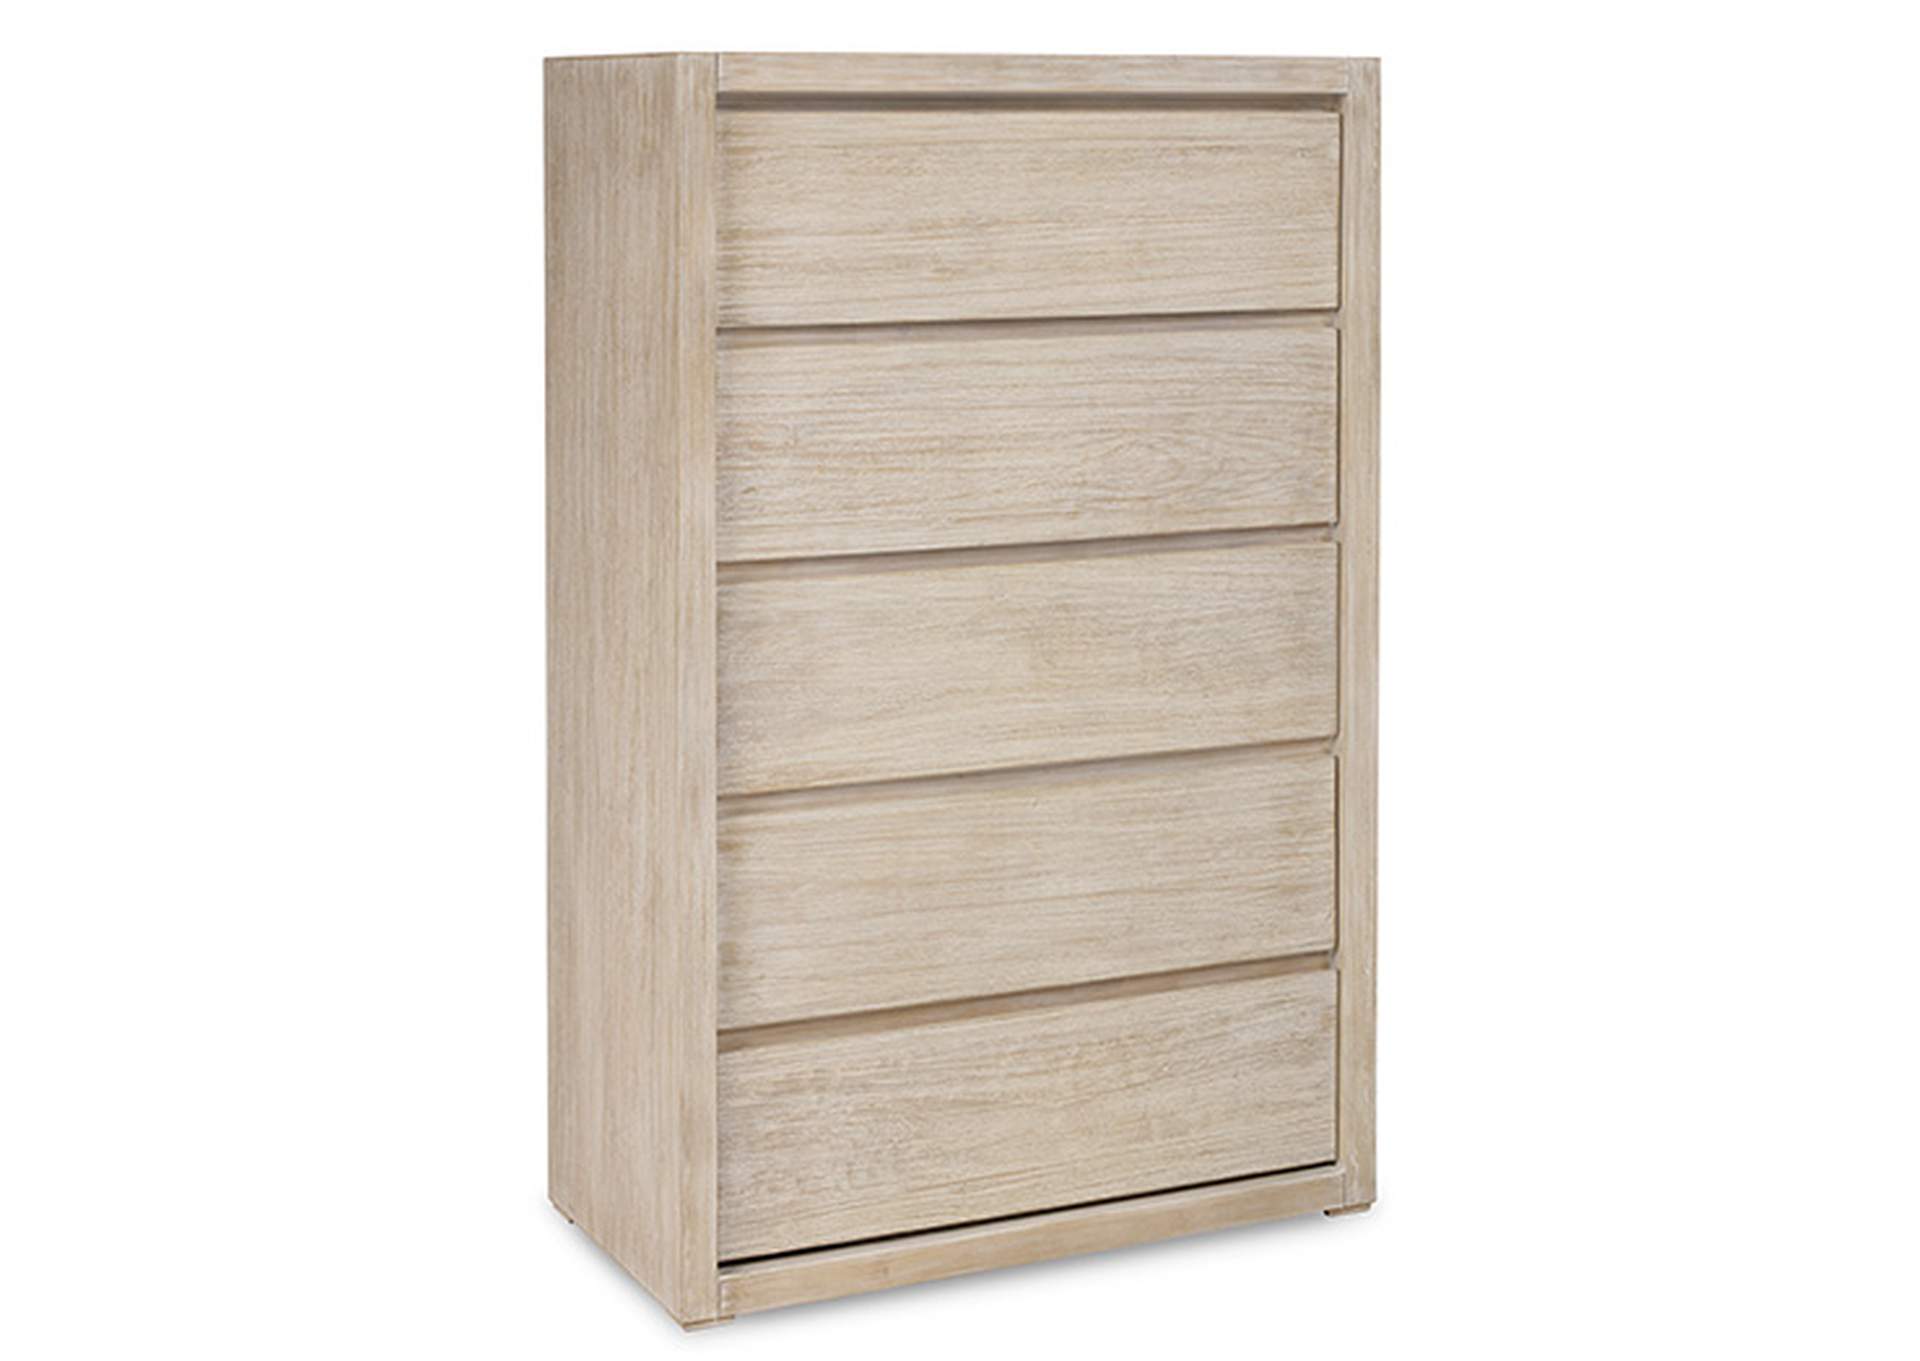 Michelia Chest of Drawers,Ashley